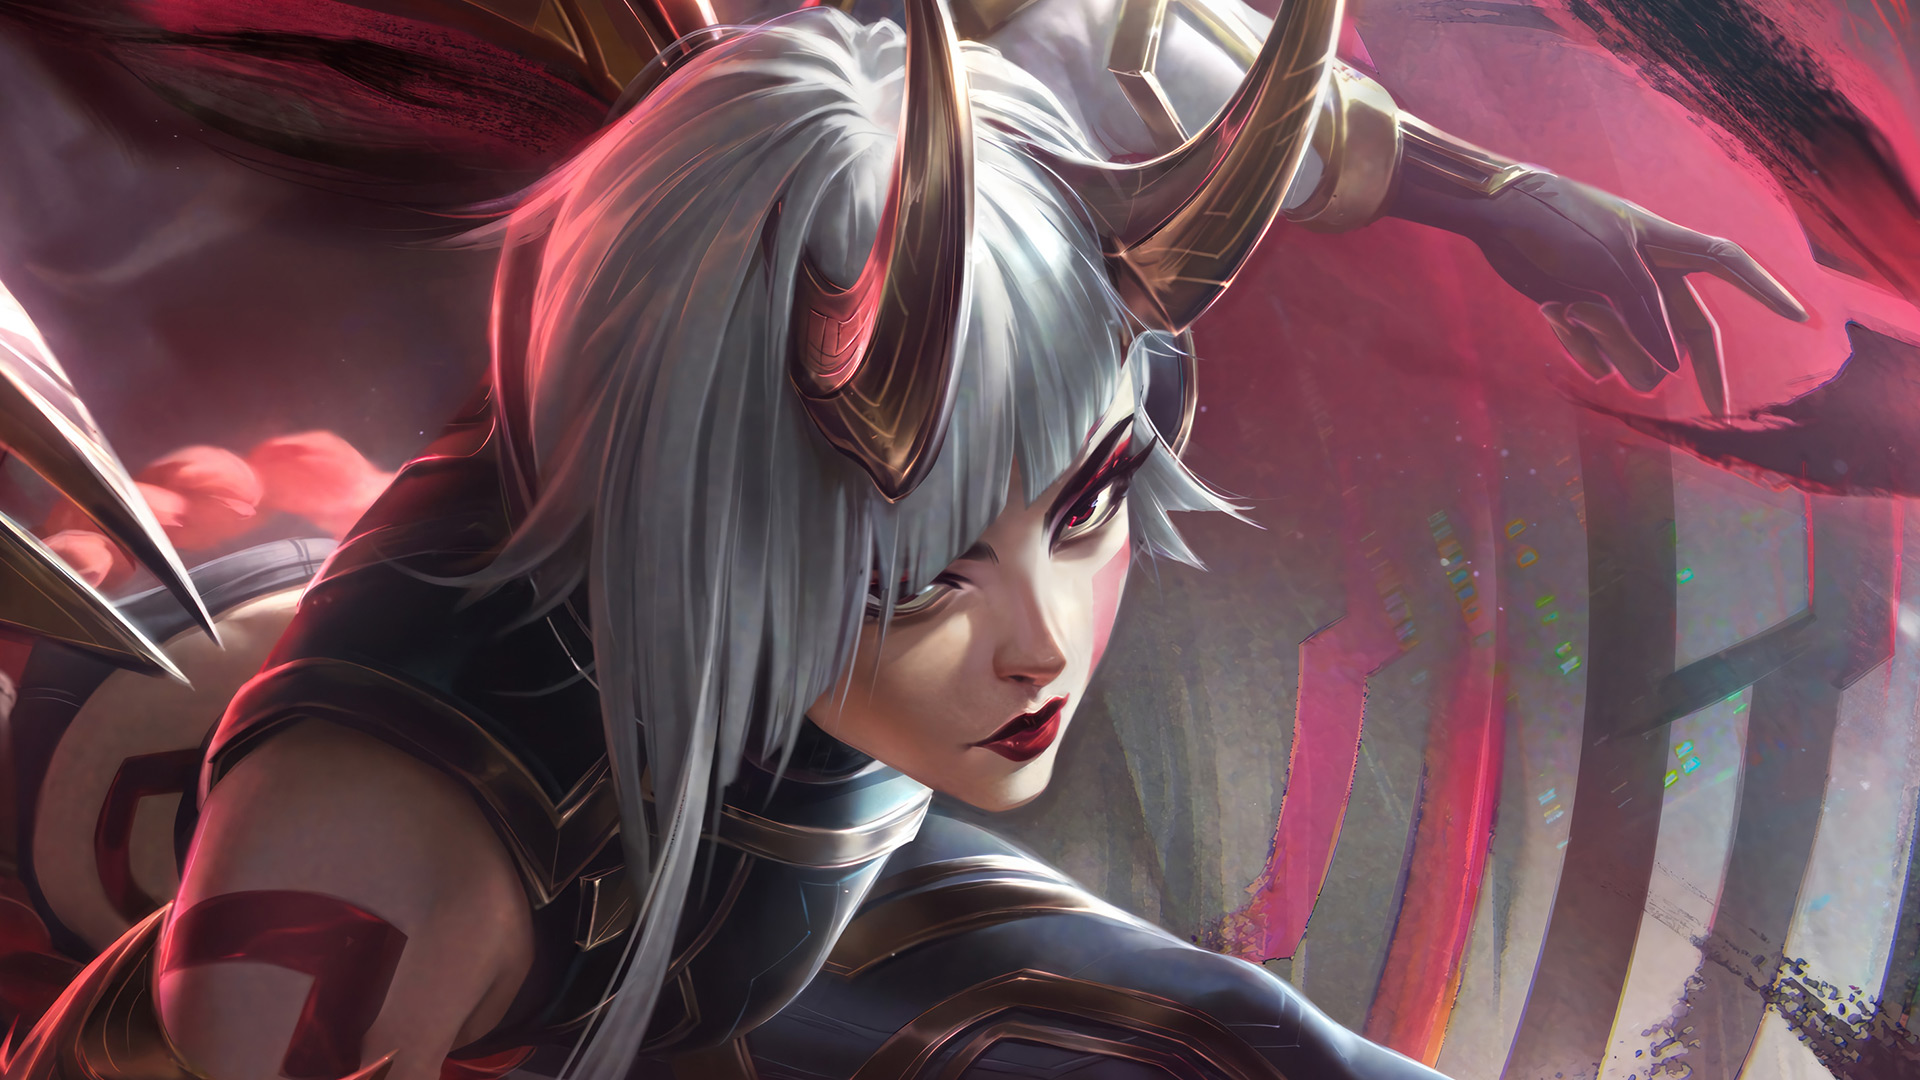 Controversial Requested Change in League of Legends Community: An Unanticipated Proposition